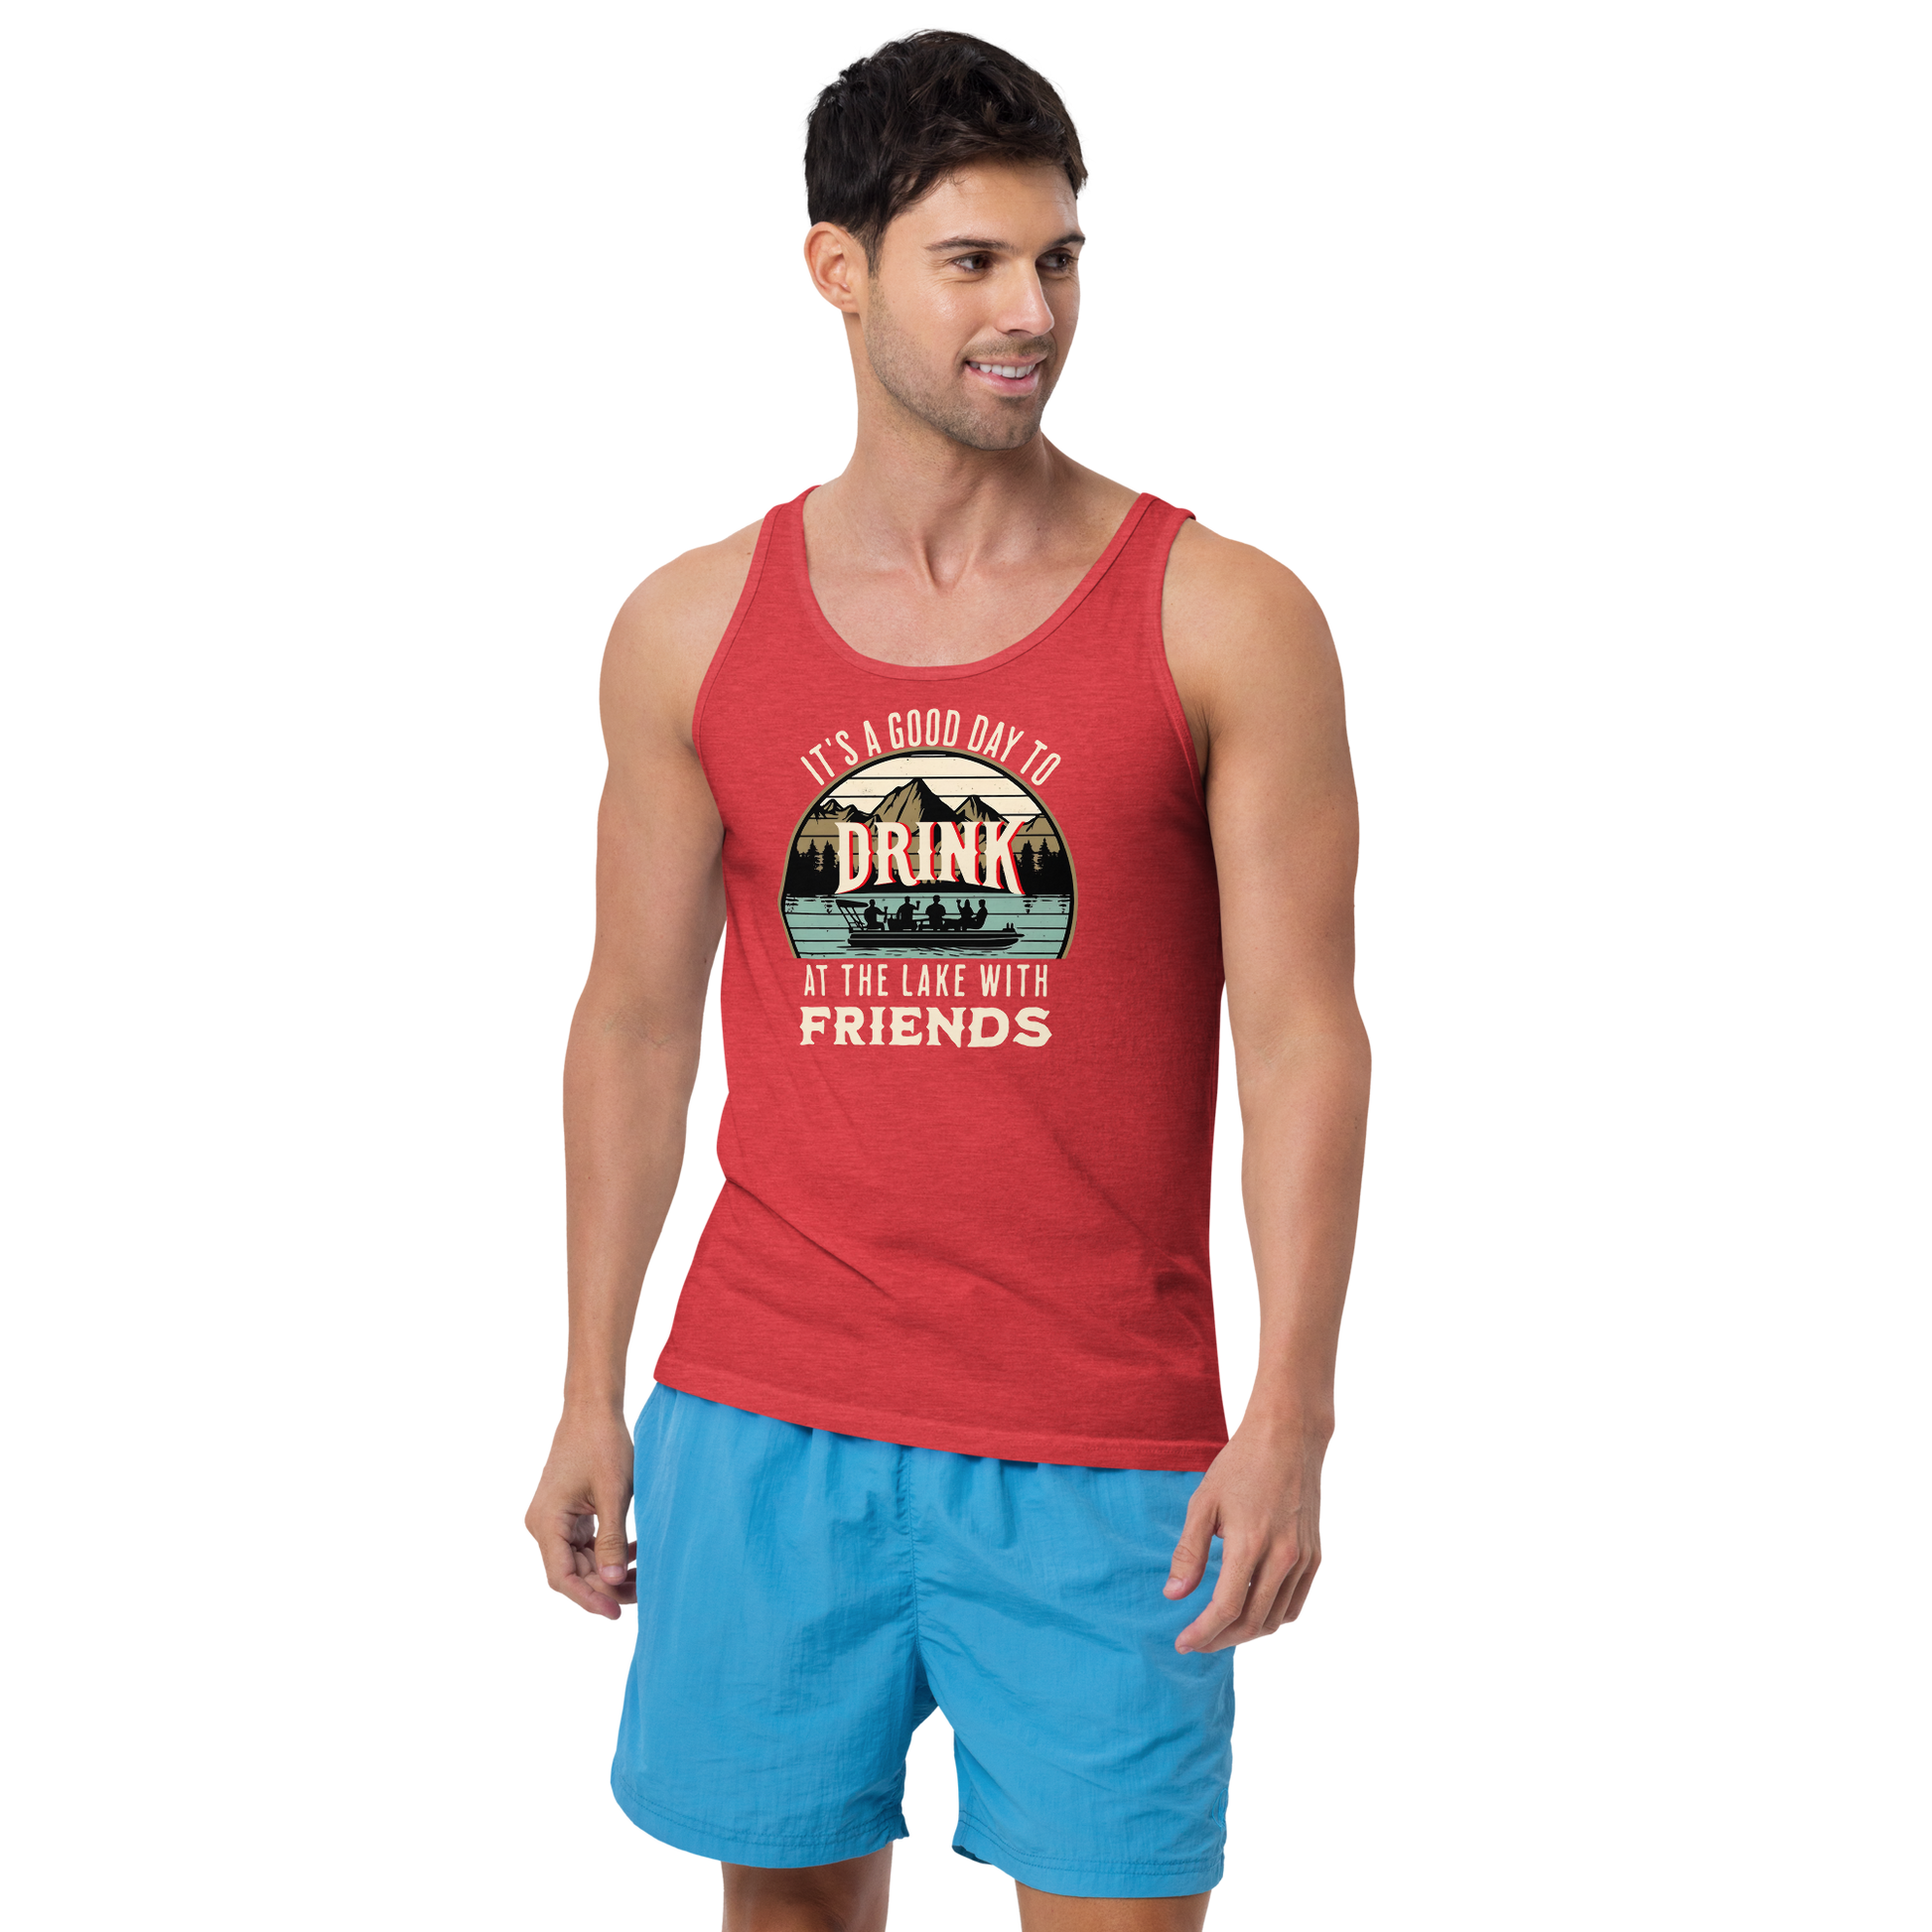 Men's tank top with "It's a Good Day to Drink at the Lake with Friends," depicting friends on a boat, lake and mountains.